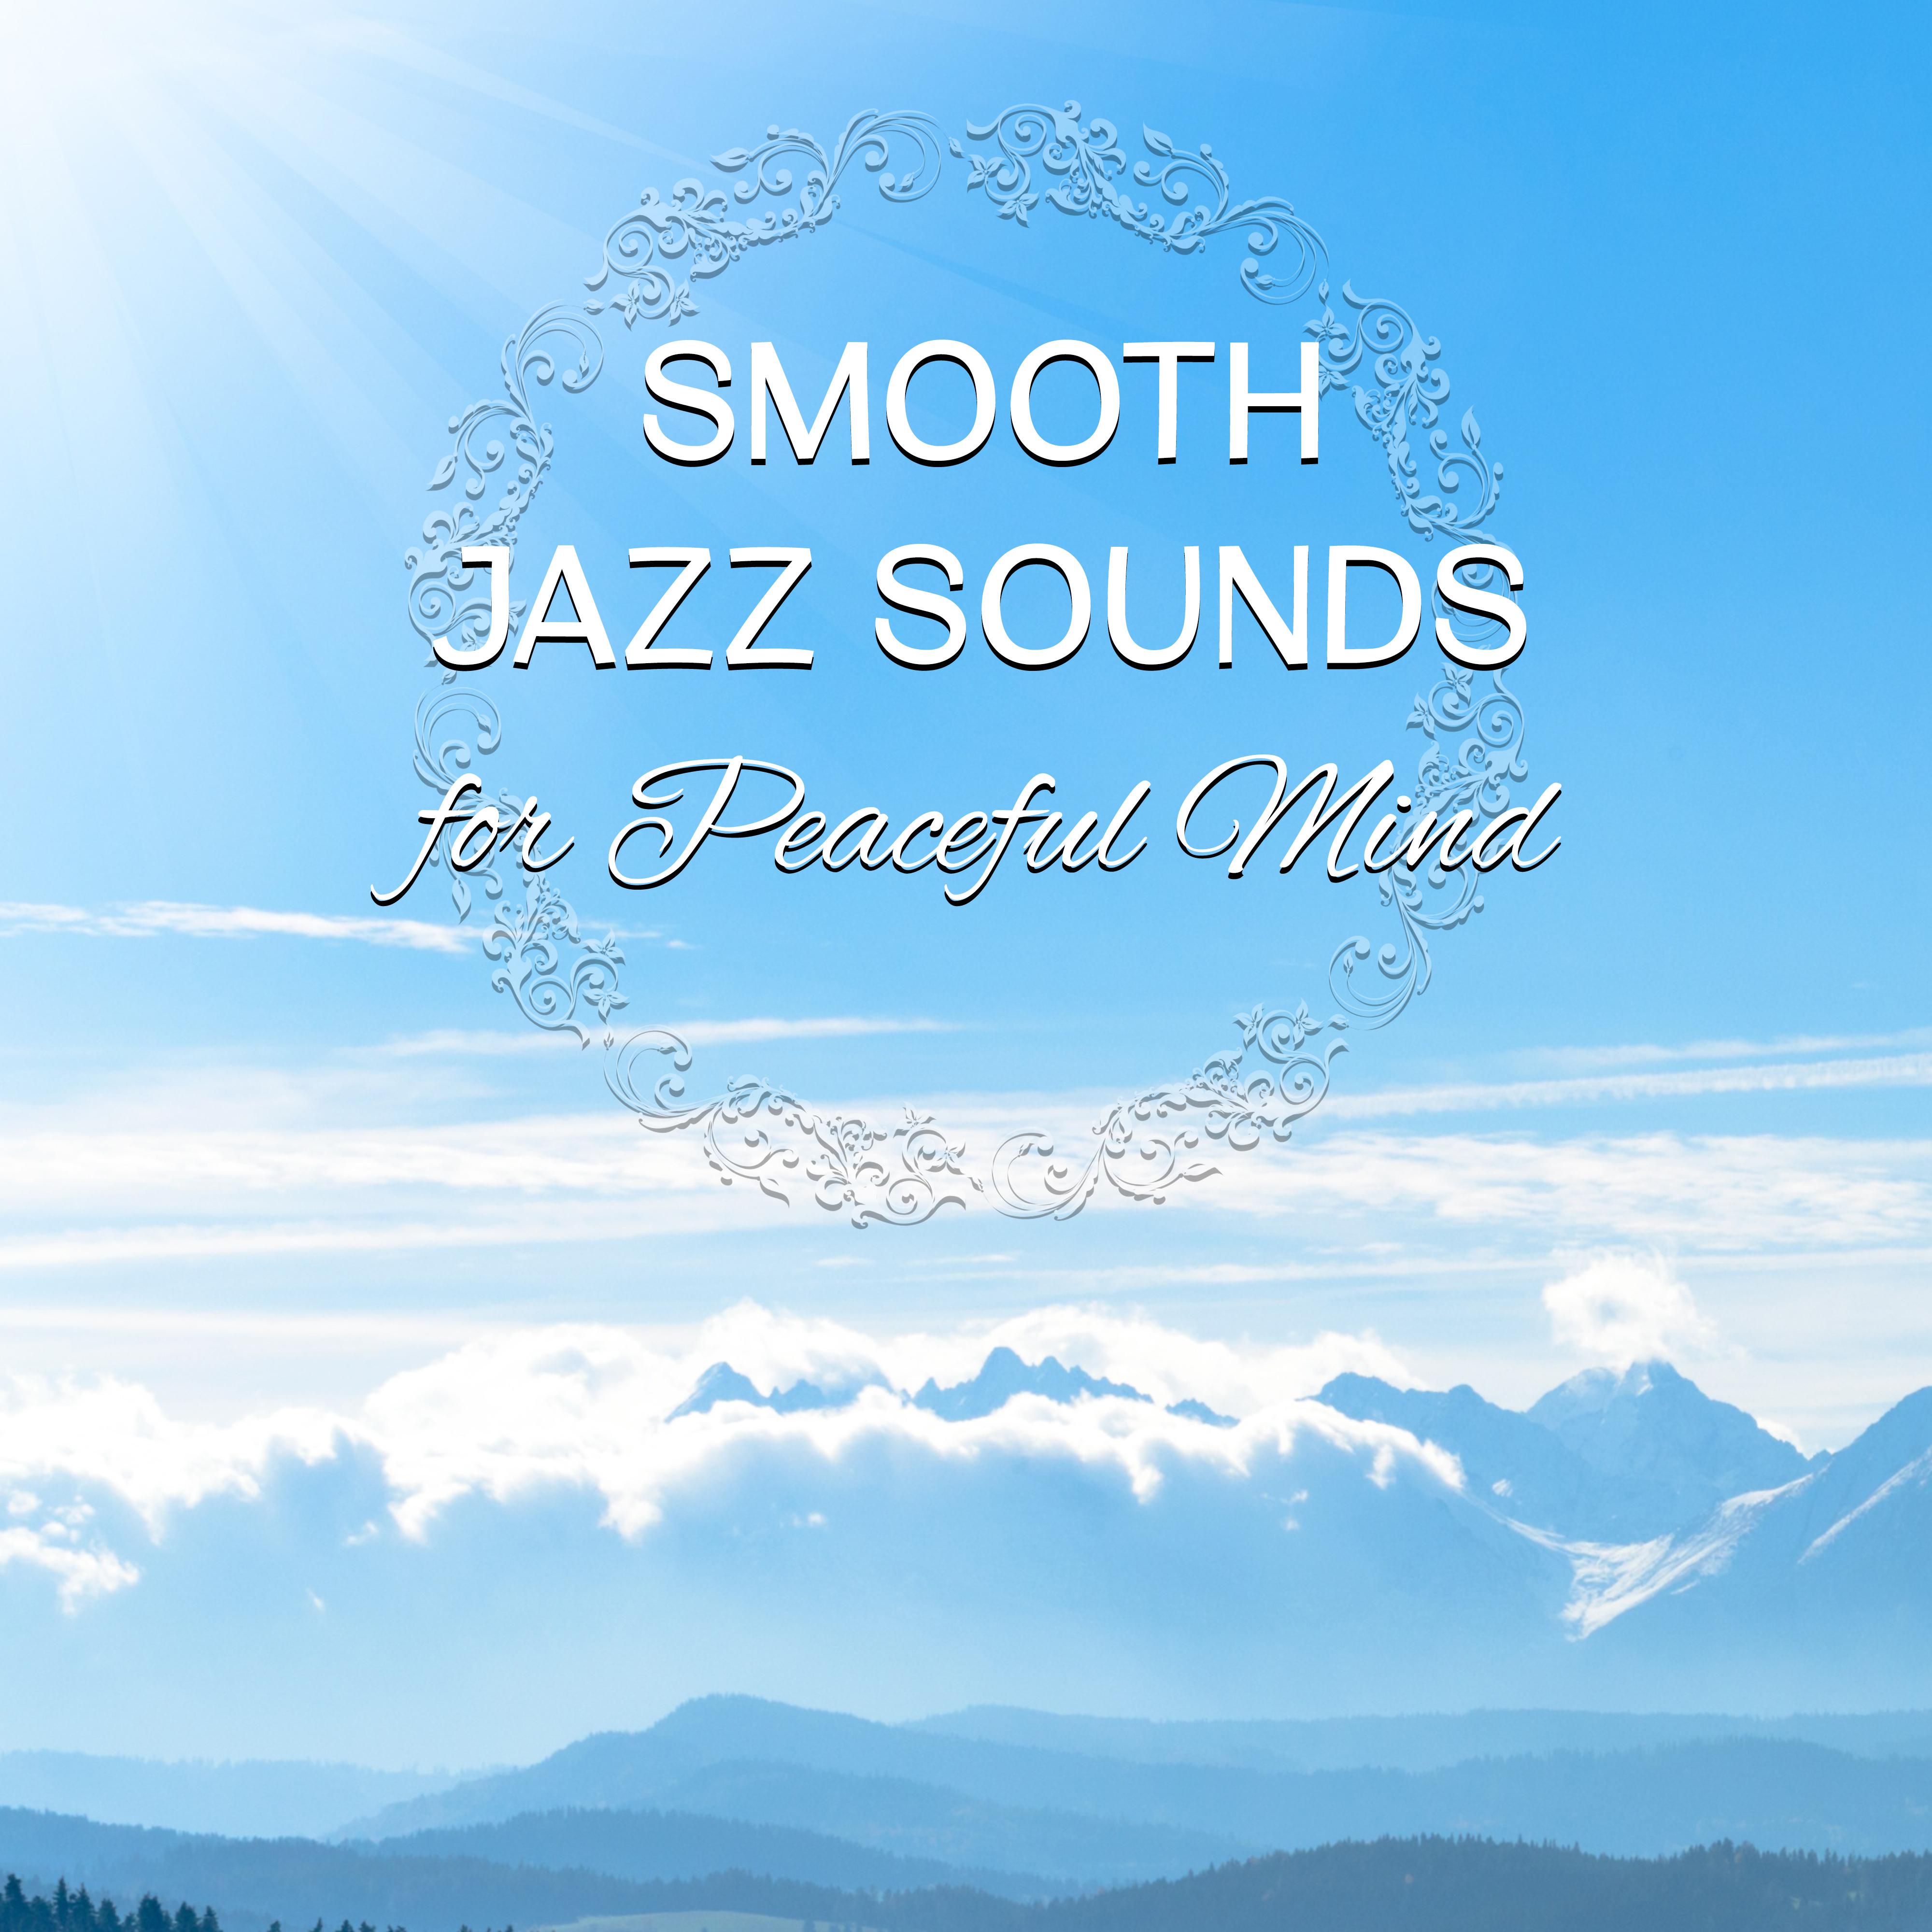 Smooth Jazz Sounds for Peaceful Mind  Soft Sounds to Relax, Jazz Music, Moonlight Piano, Instrumental Evening Jazz